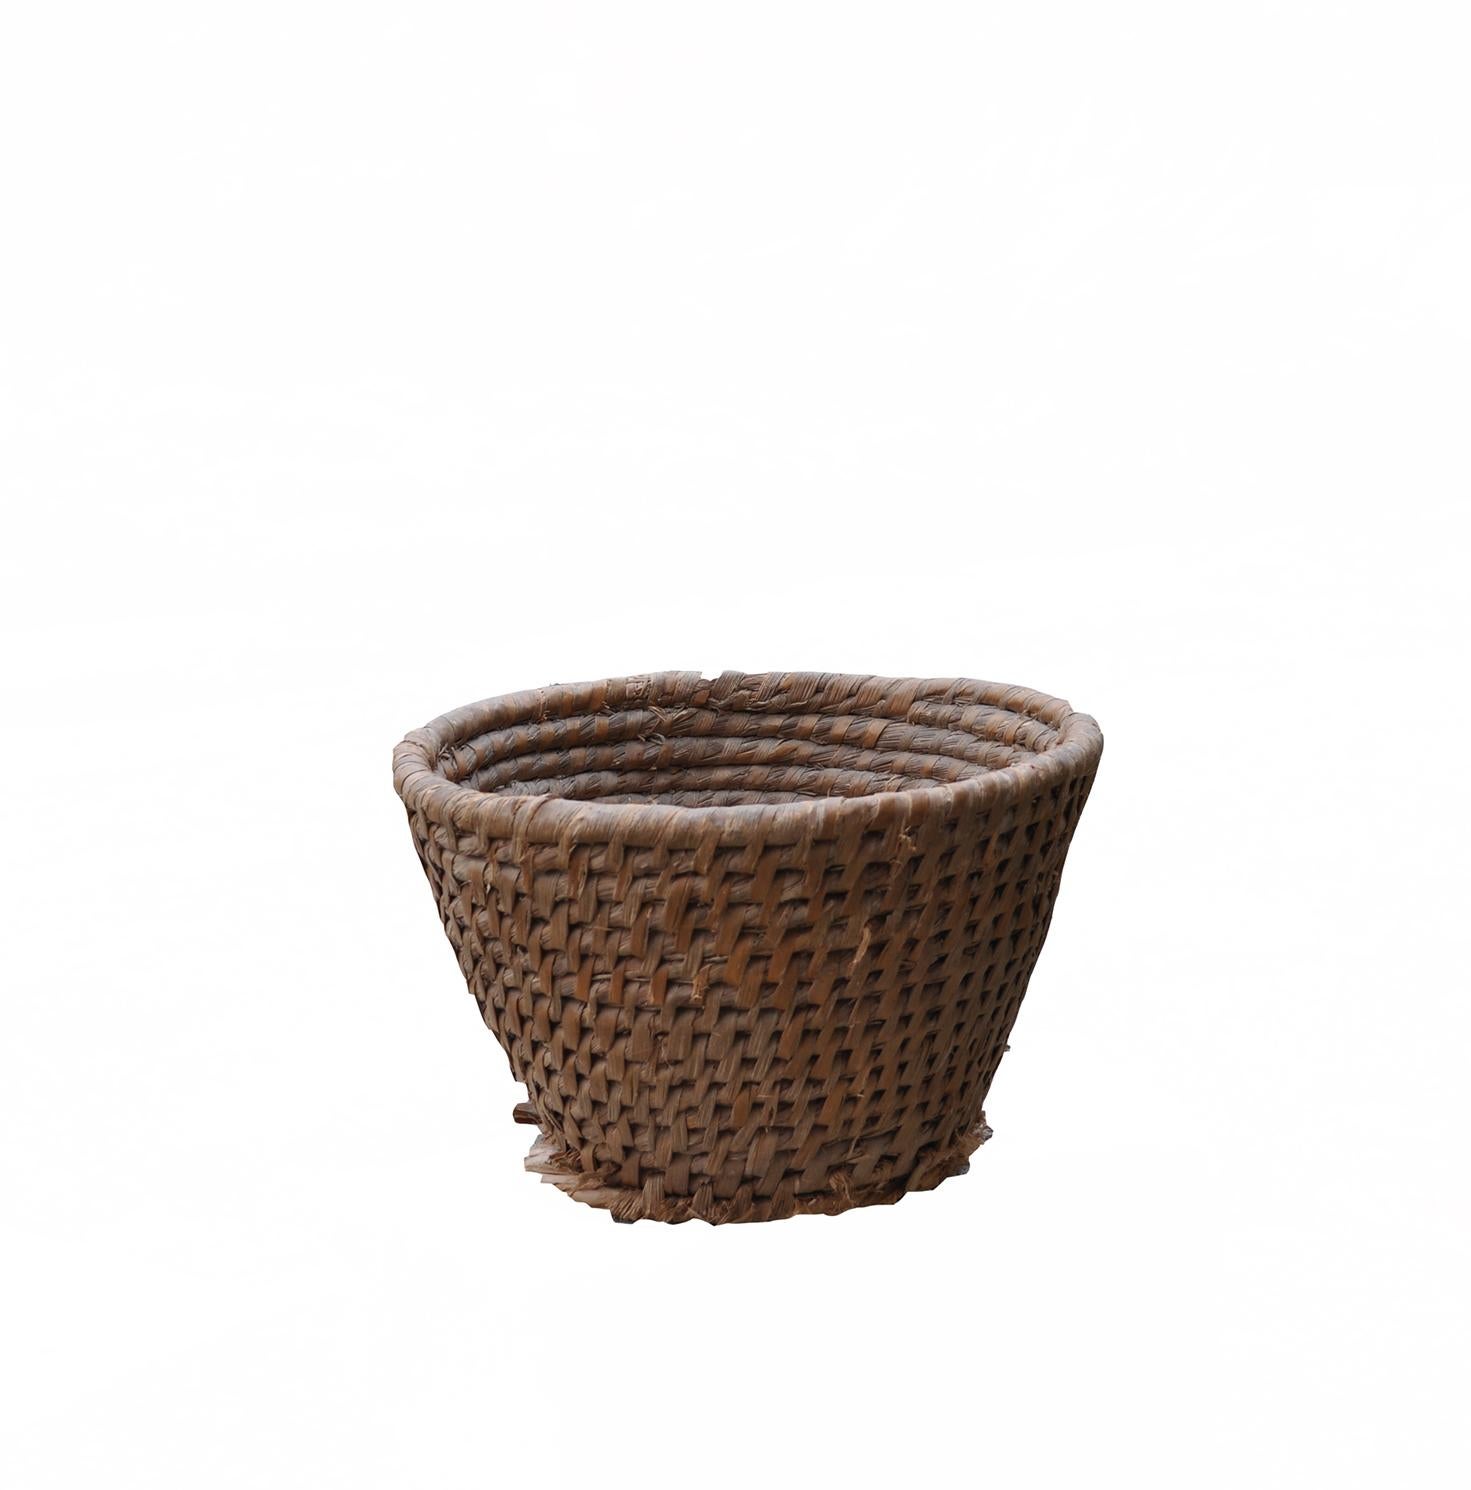 Hungarian Vintage Rye Coiled Straw Basket, circa 1940s For Sale